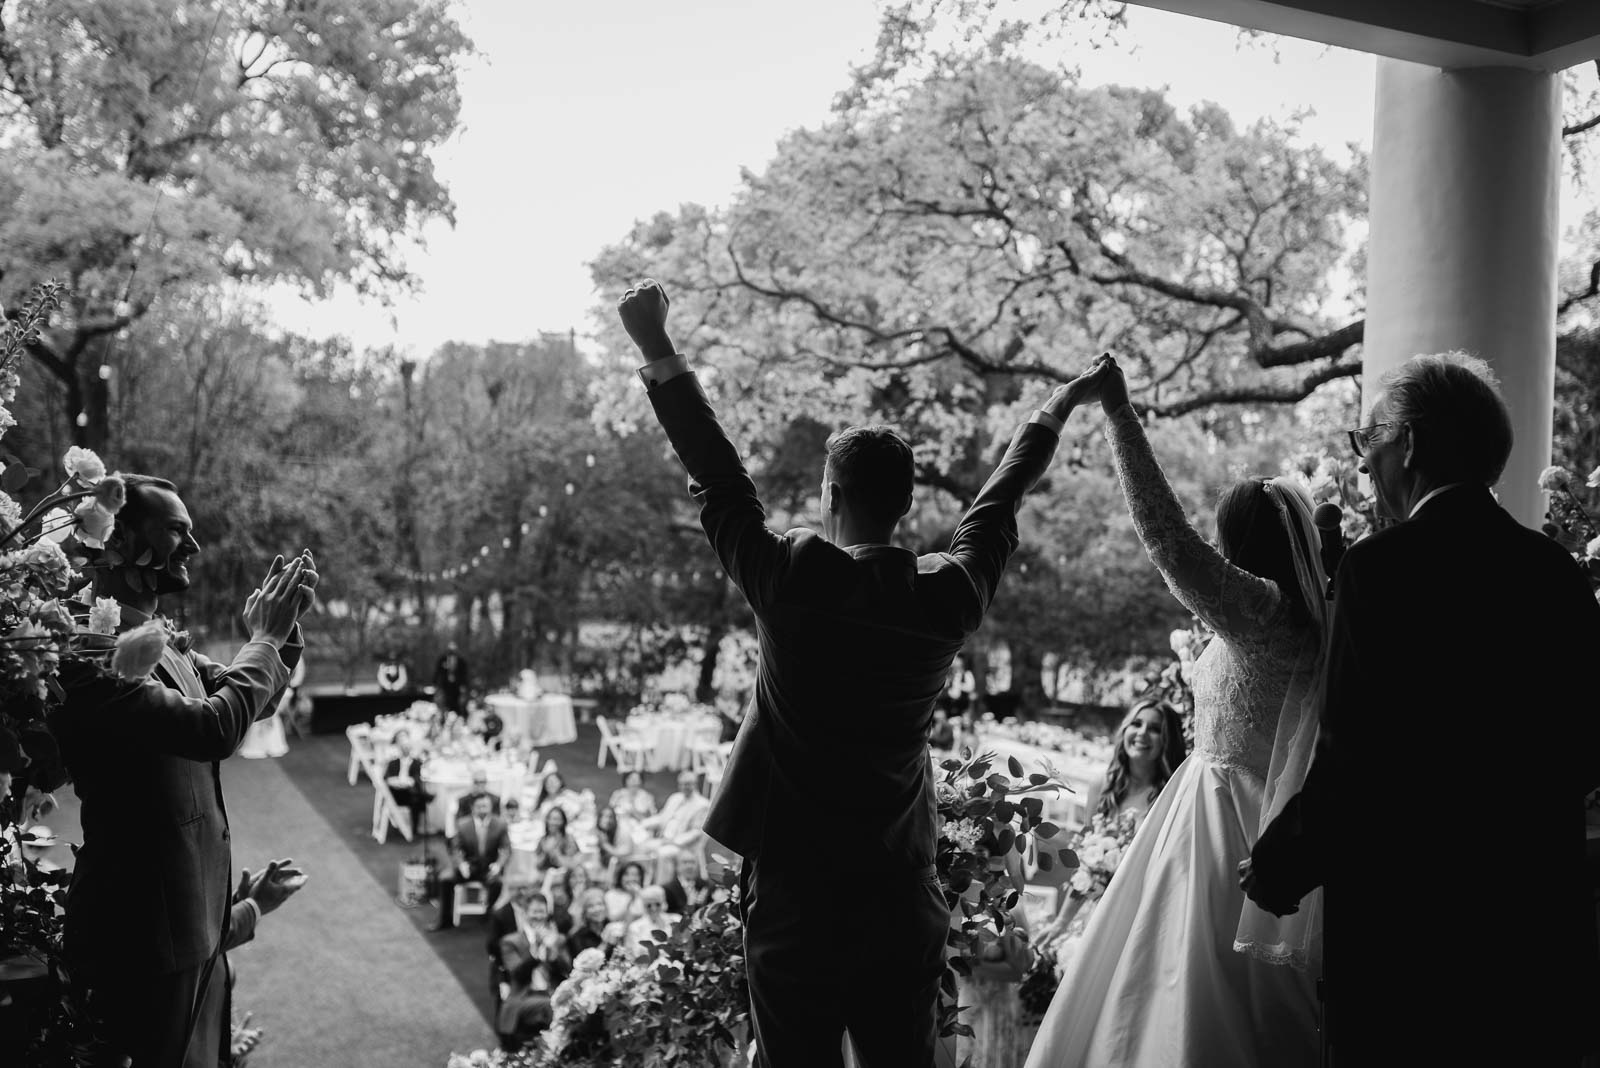 With their hands raised a photograph from behind the bride and groom as they celebrate their marriage towards the crowd celebrates